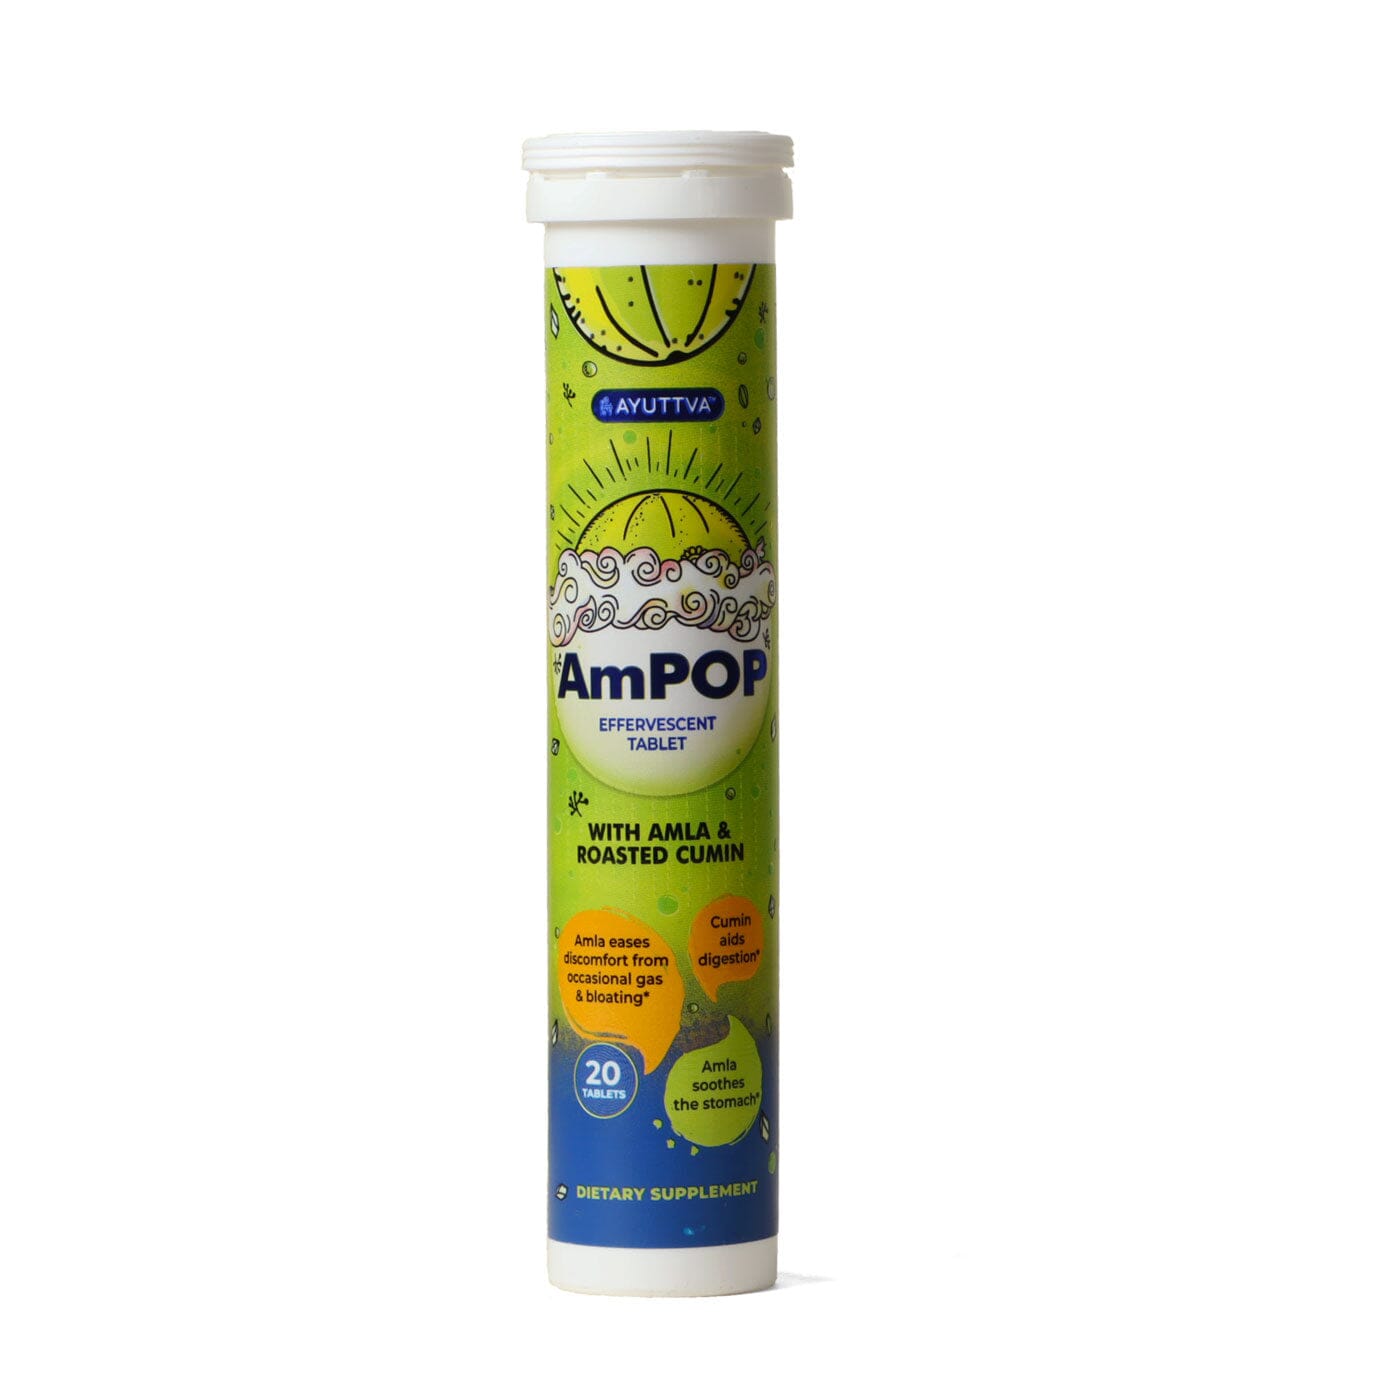 AmPOP for Quick Relief - The Only Ayurvedic Effervescent with 1500mg Amla Extract and Roasted Cumin